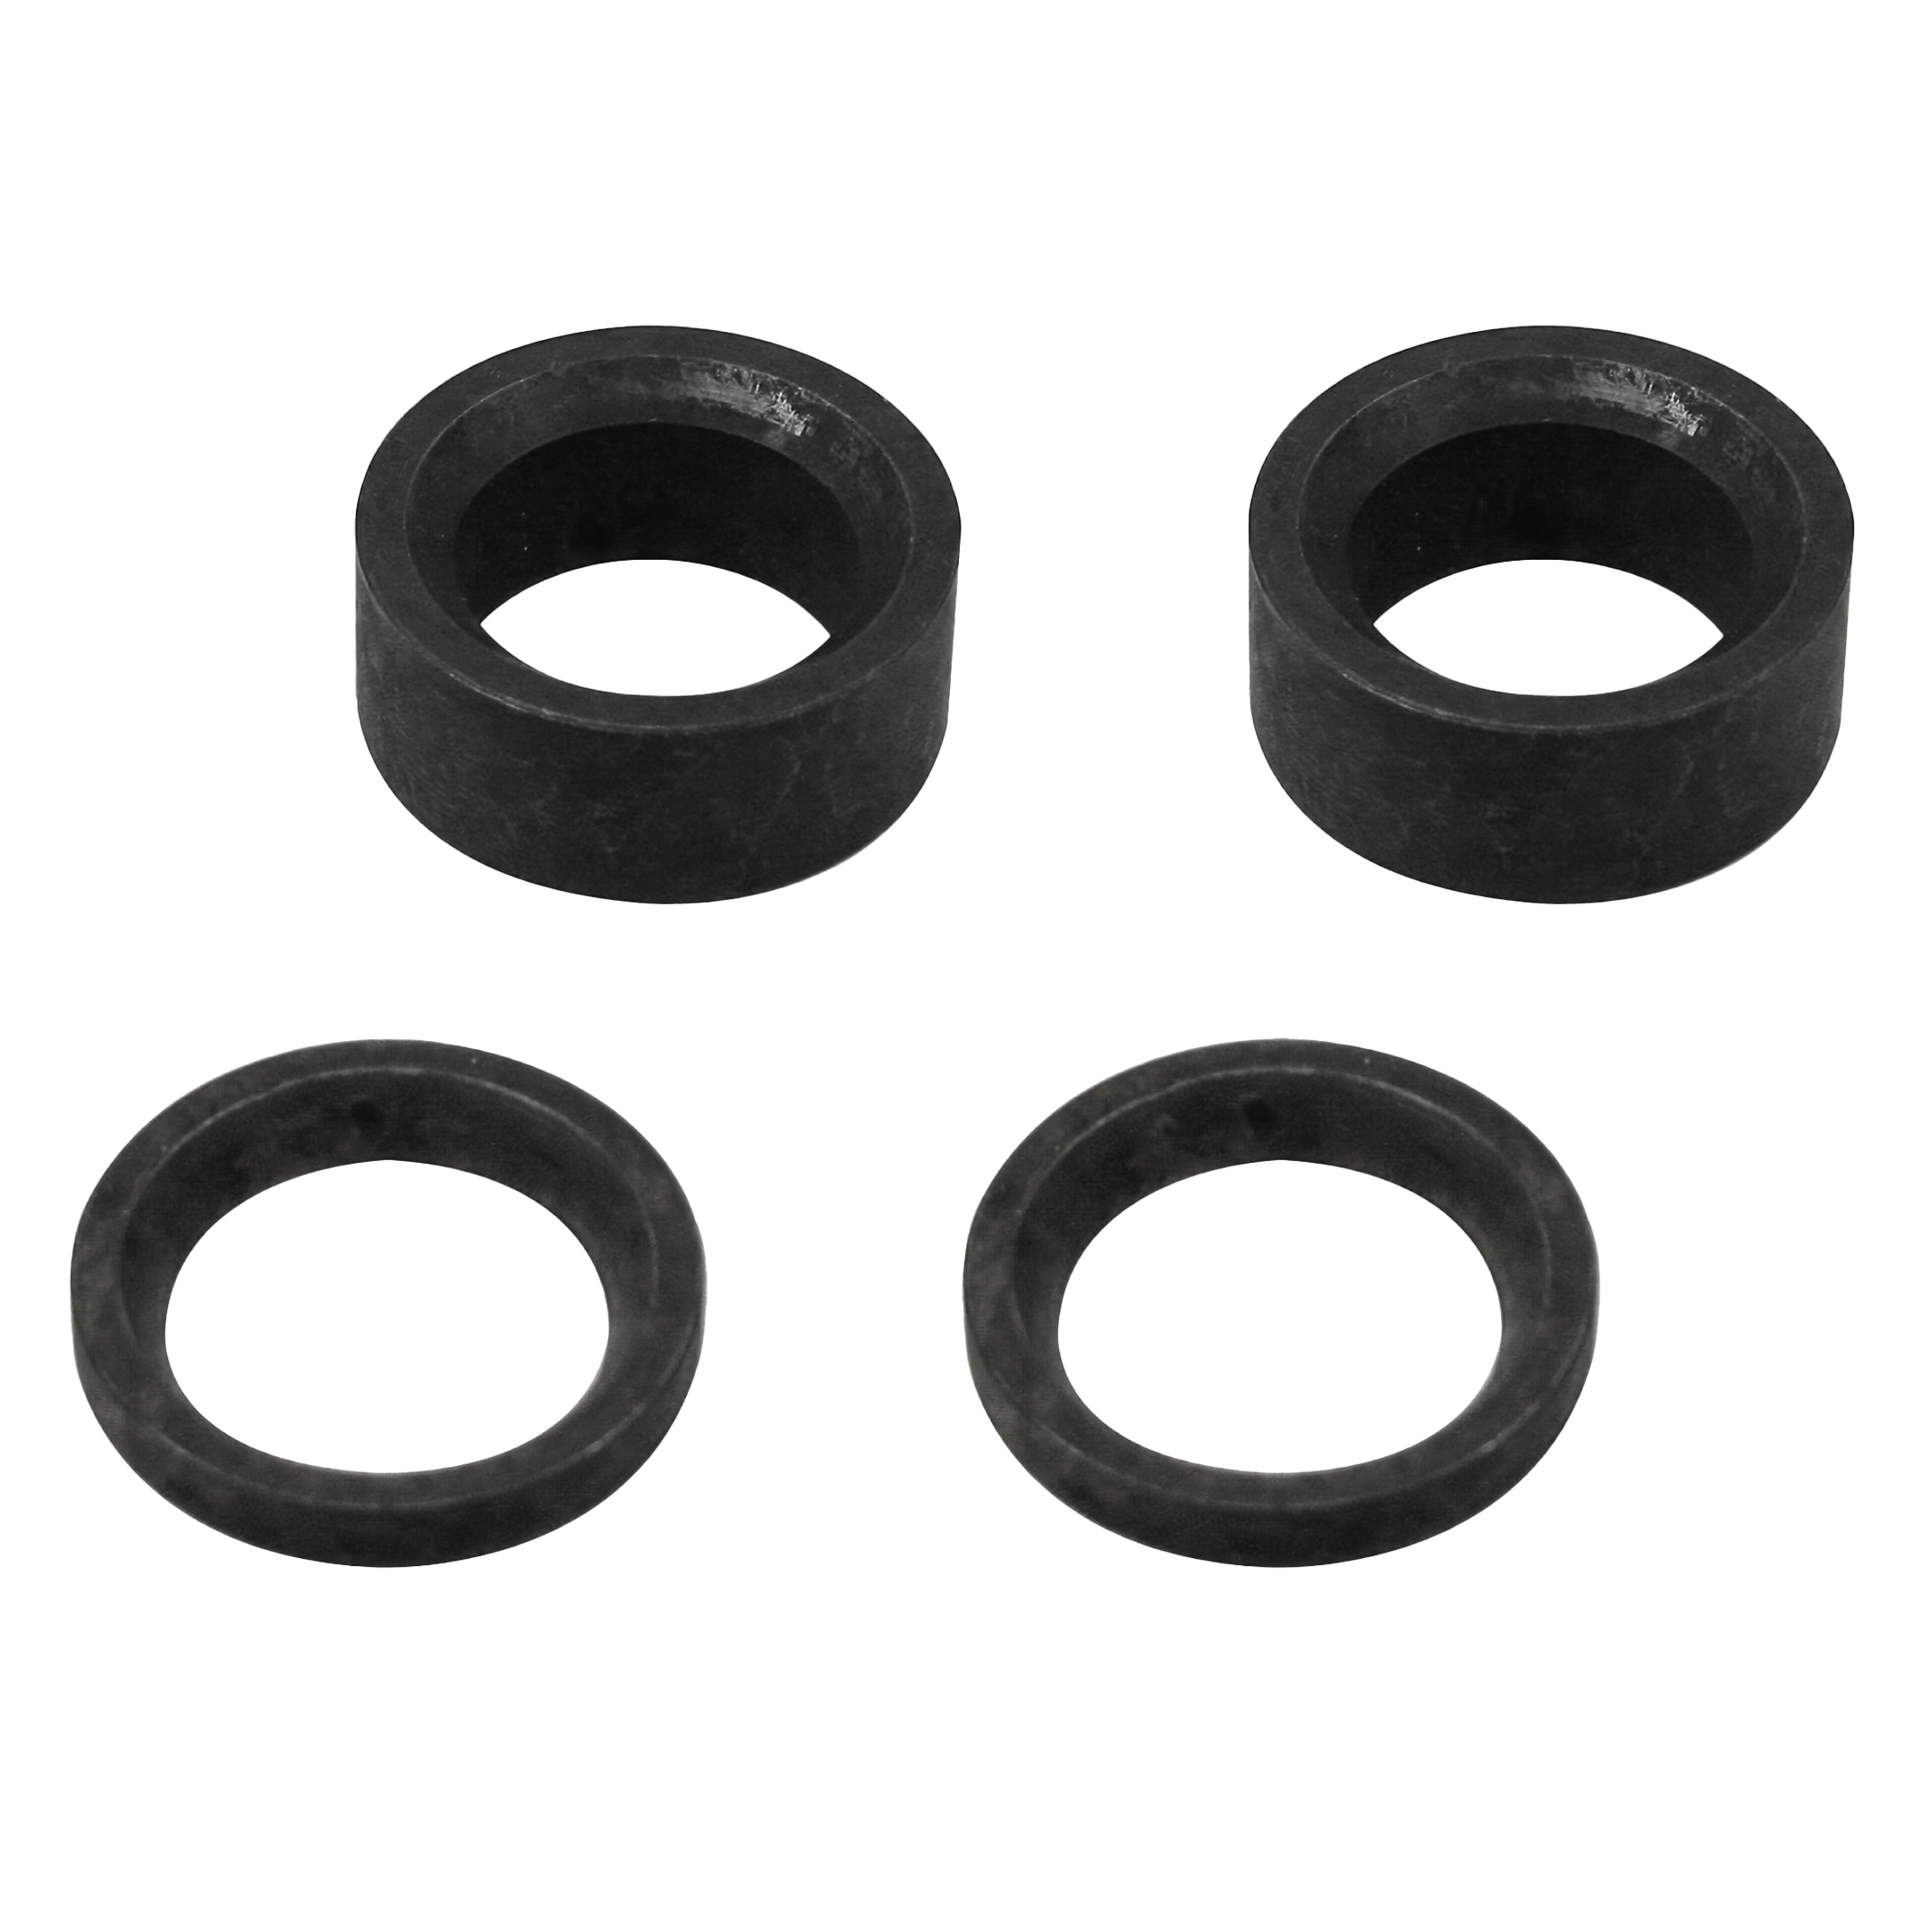 VW Axle Spacer Kit for Swing Axle - 4 Pieces